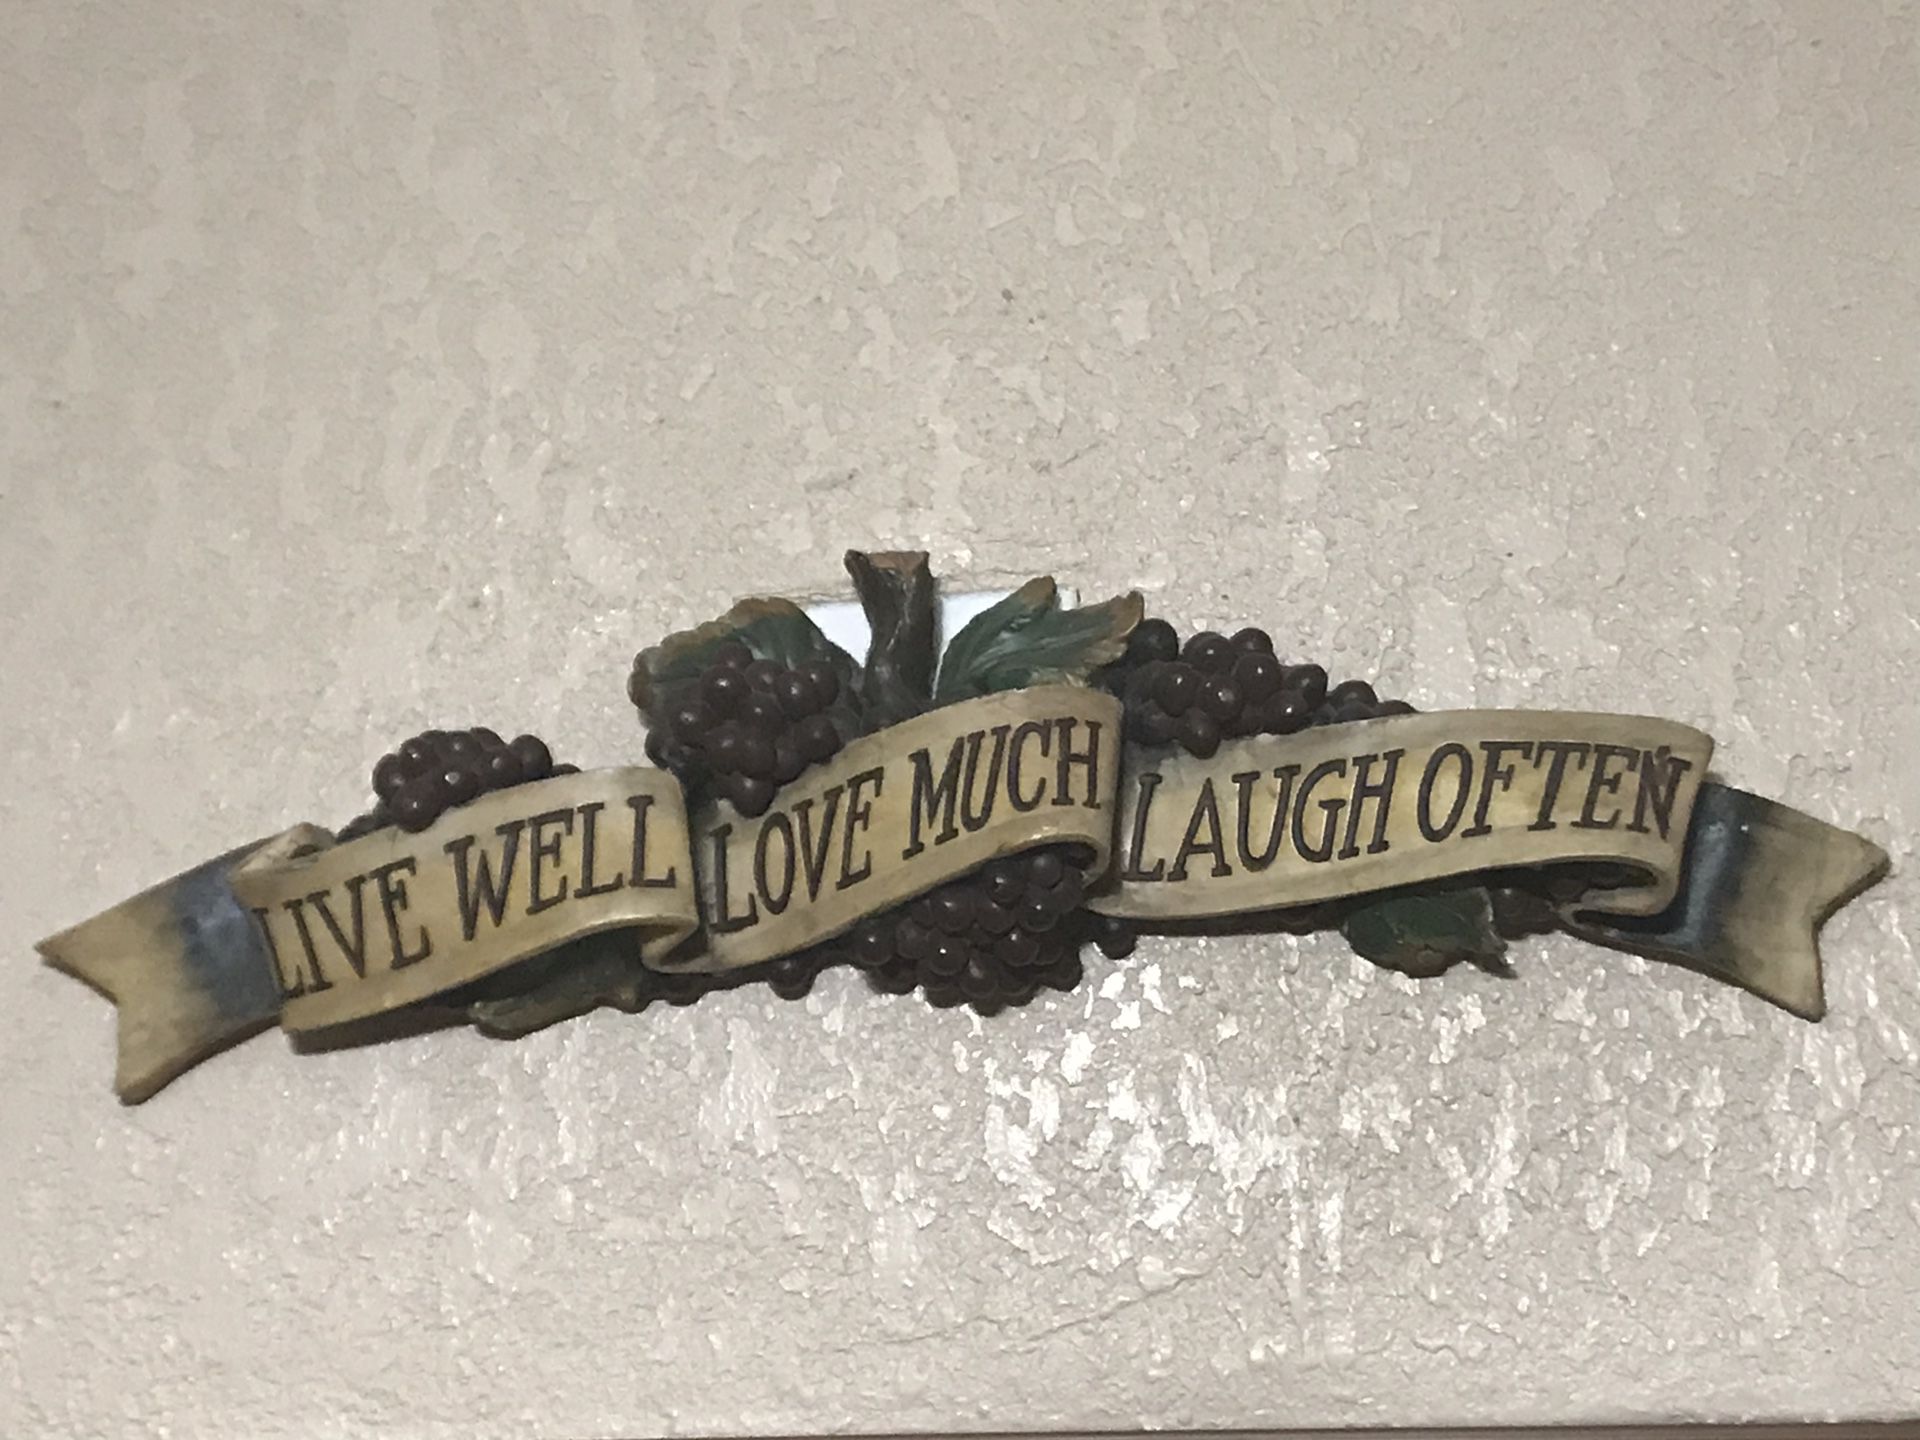 Kitchen ornament “Live Well, Love Much, Laugh Often”